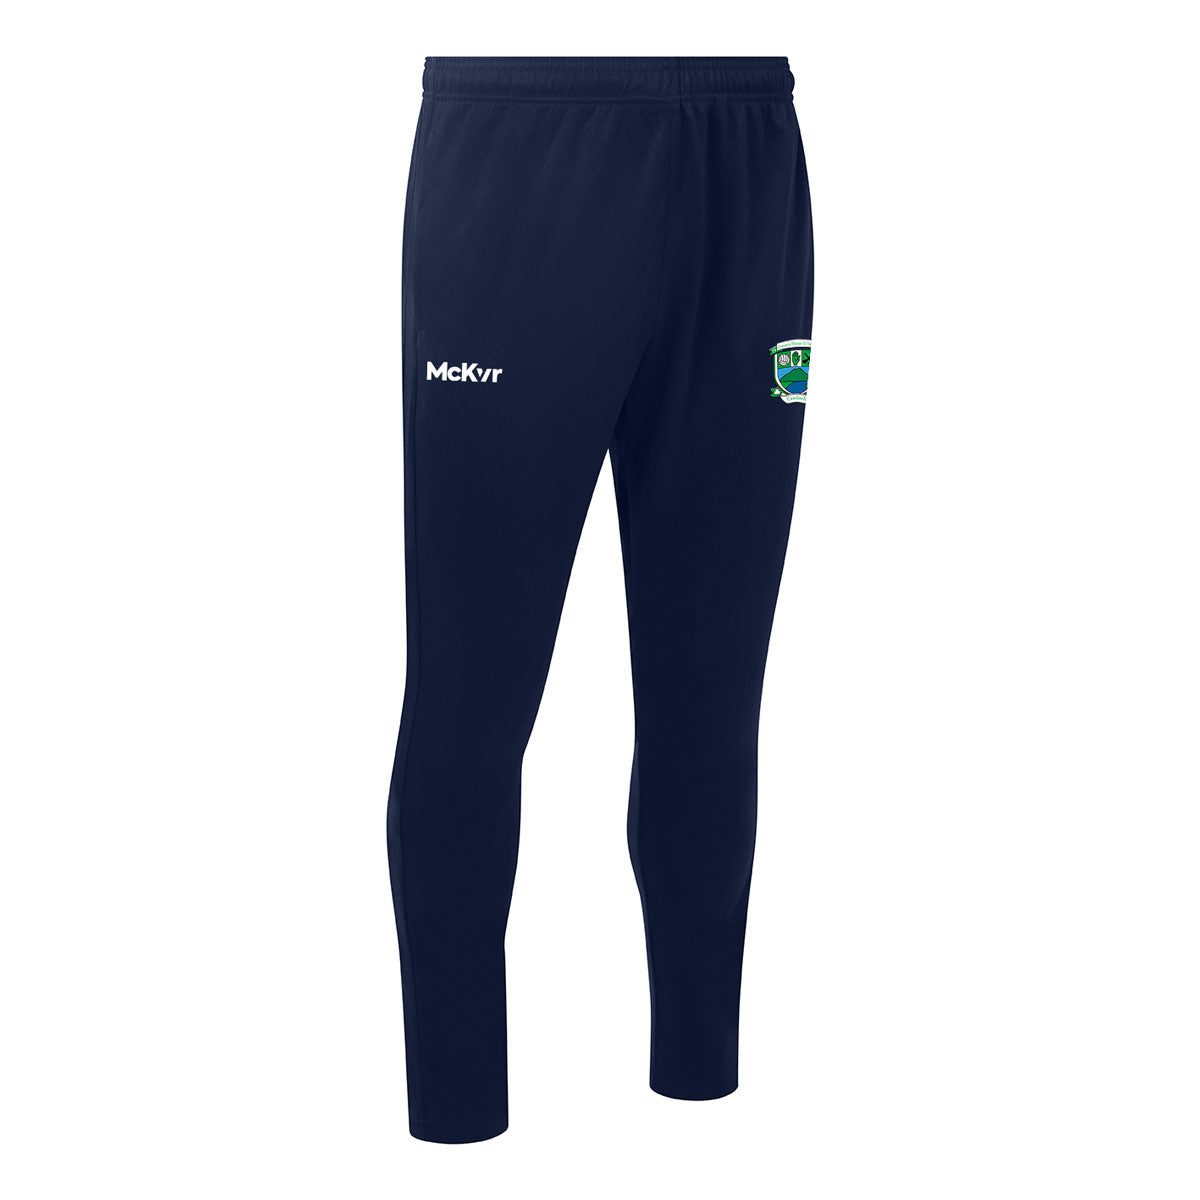 Mc Keever Shane O'Neills Camlough Core 22 Skinny Pants - Youth - Navy